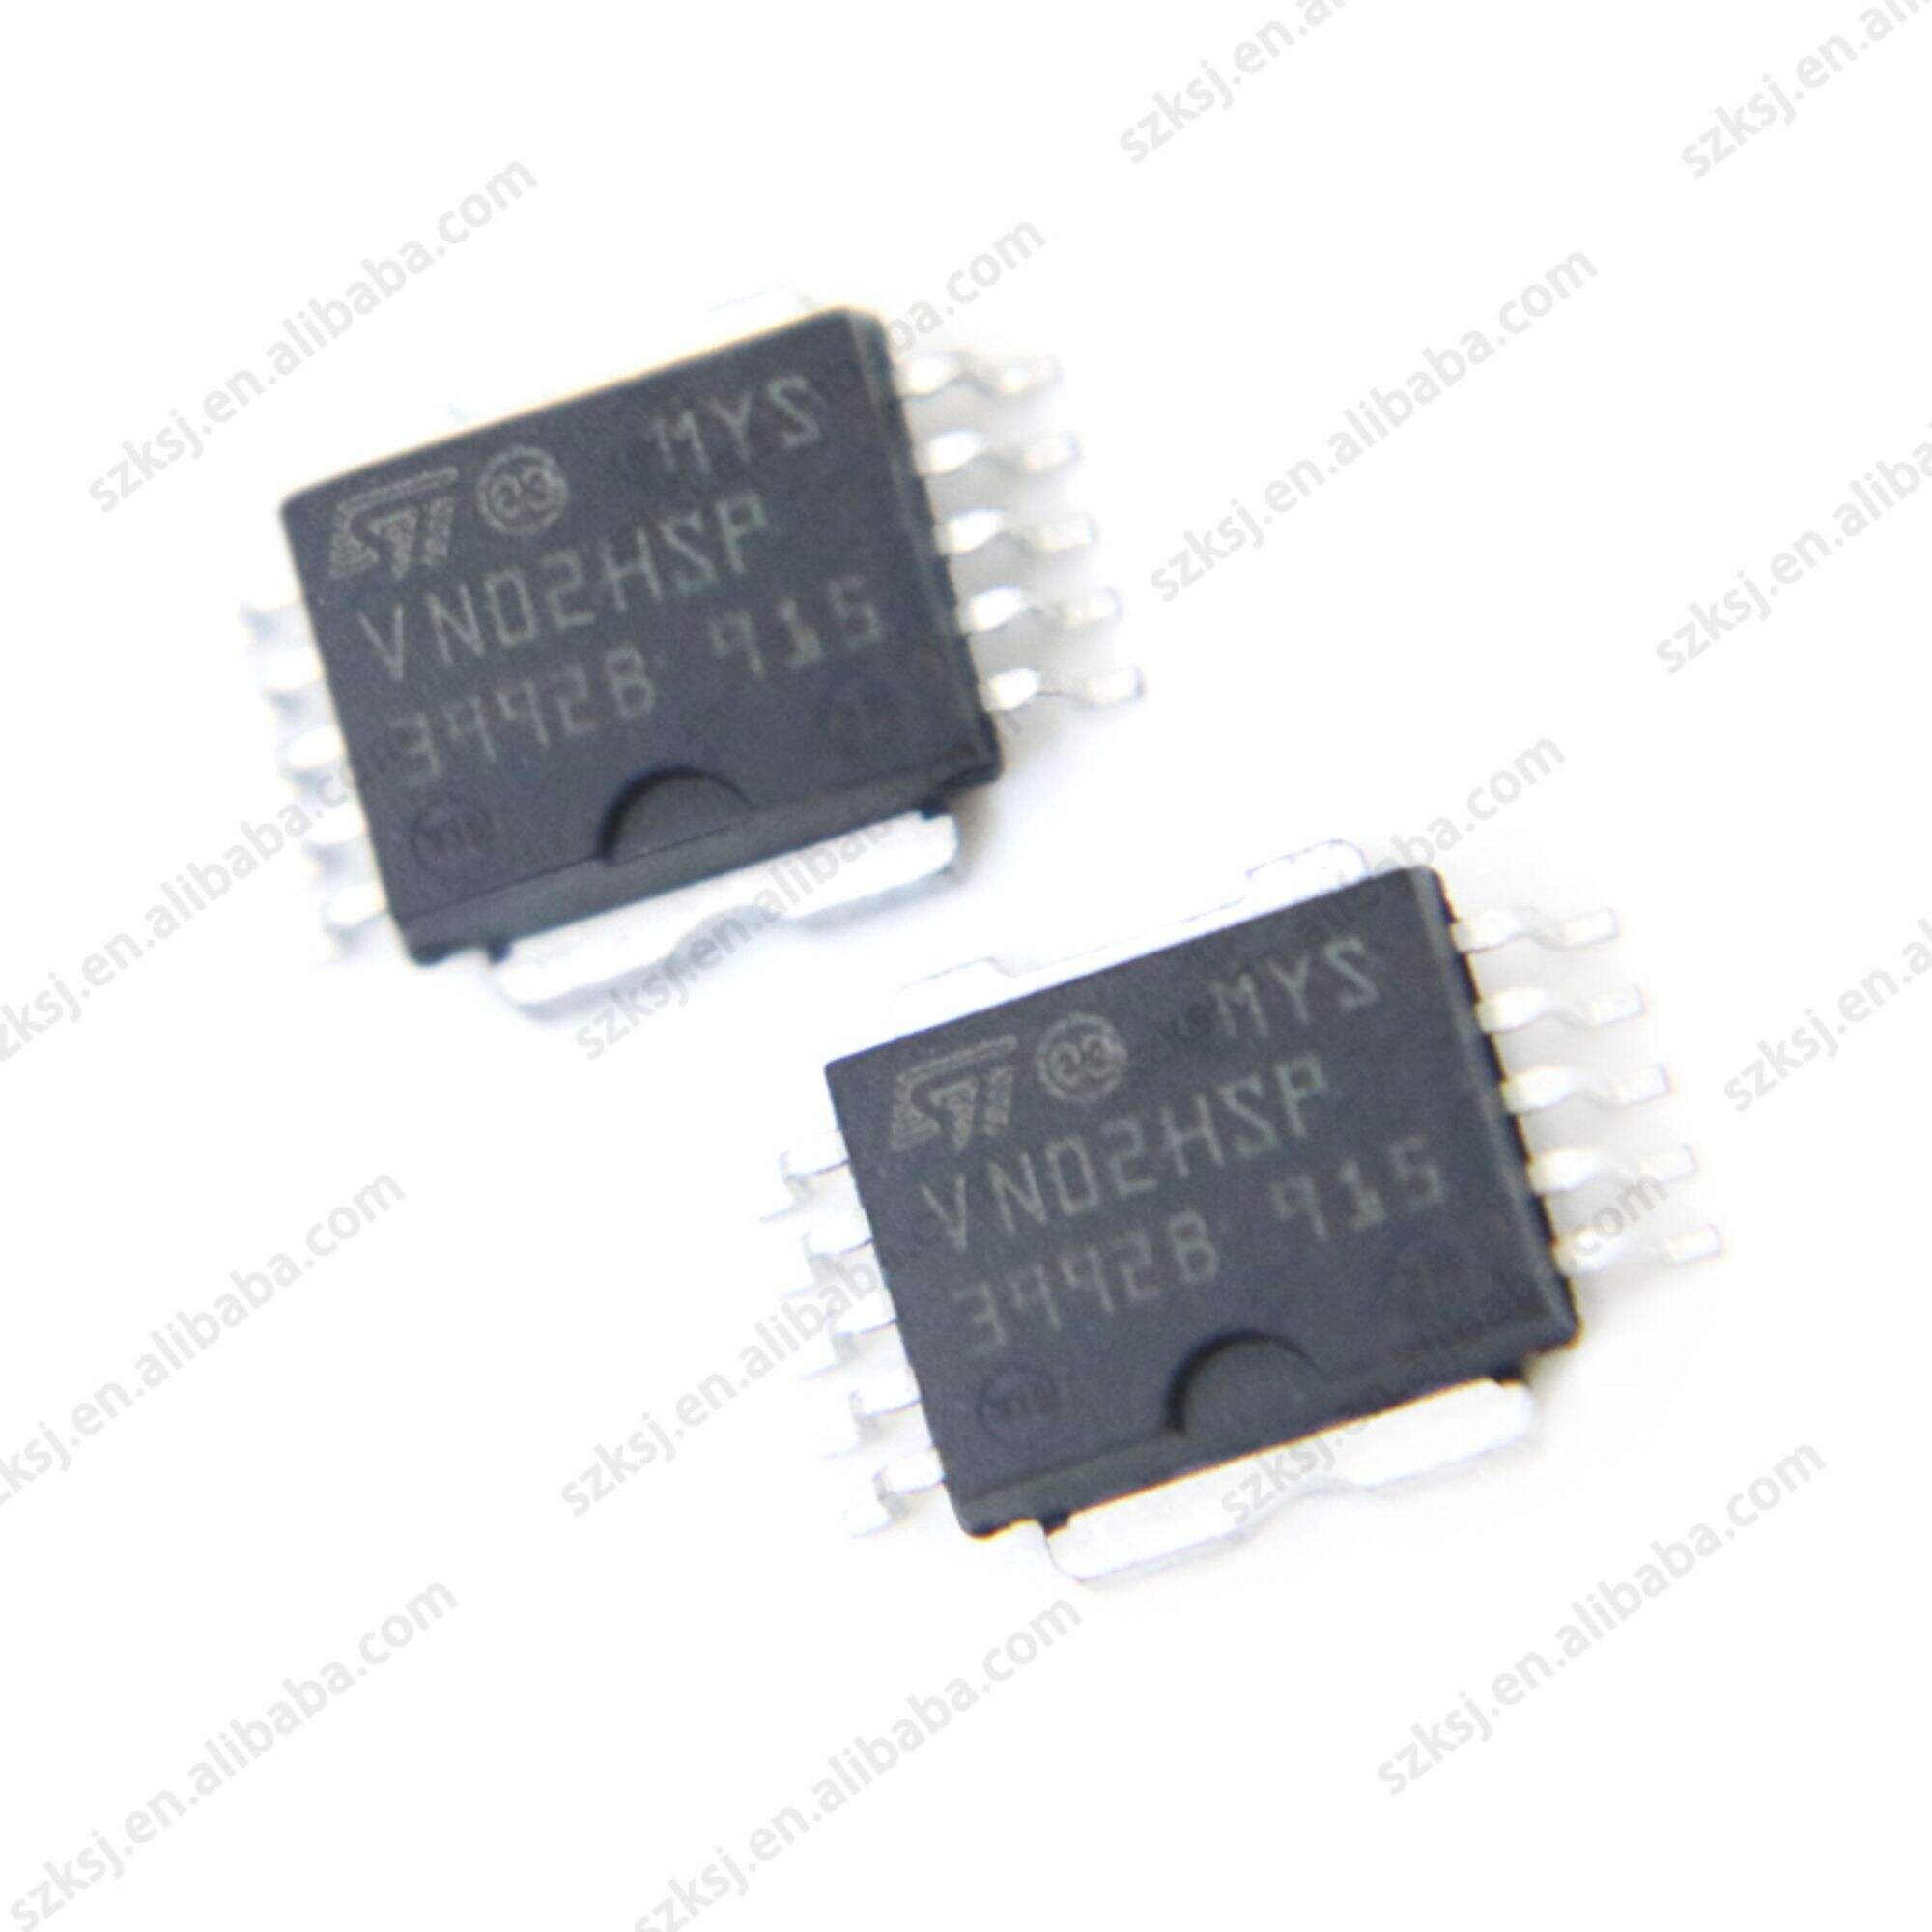 VN02HSP new original spot high-side intelligent power solid state relay SOP-10 integrated circuit IC